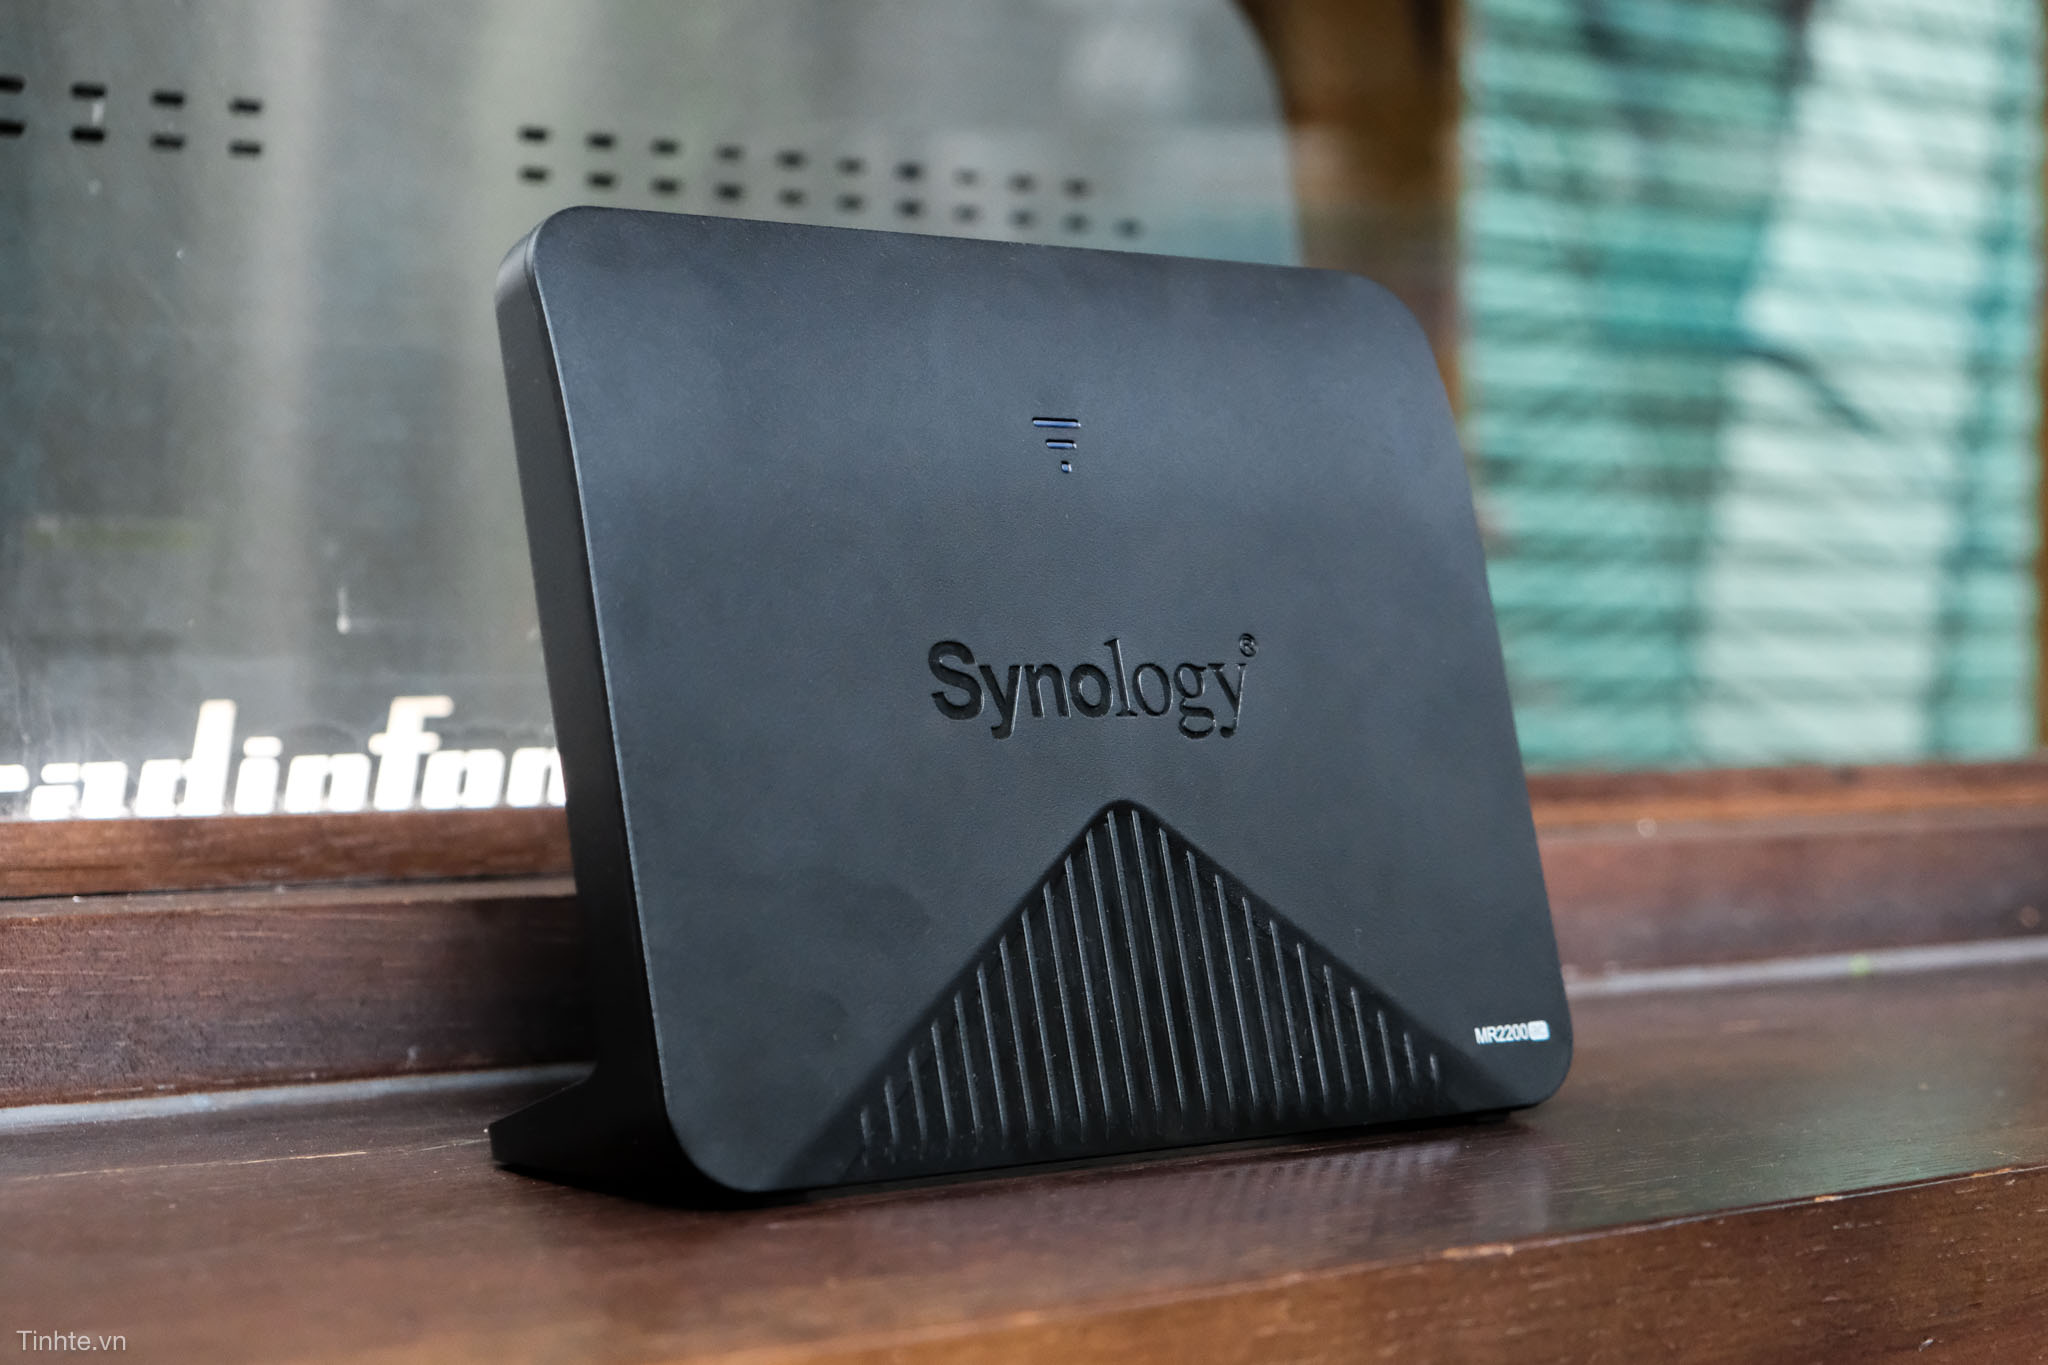 synology_router_tinhte_3-10.jpg